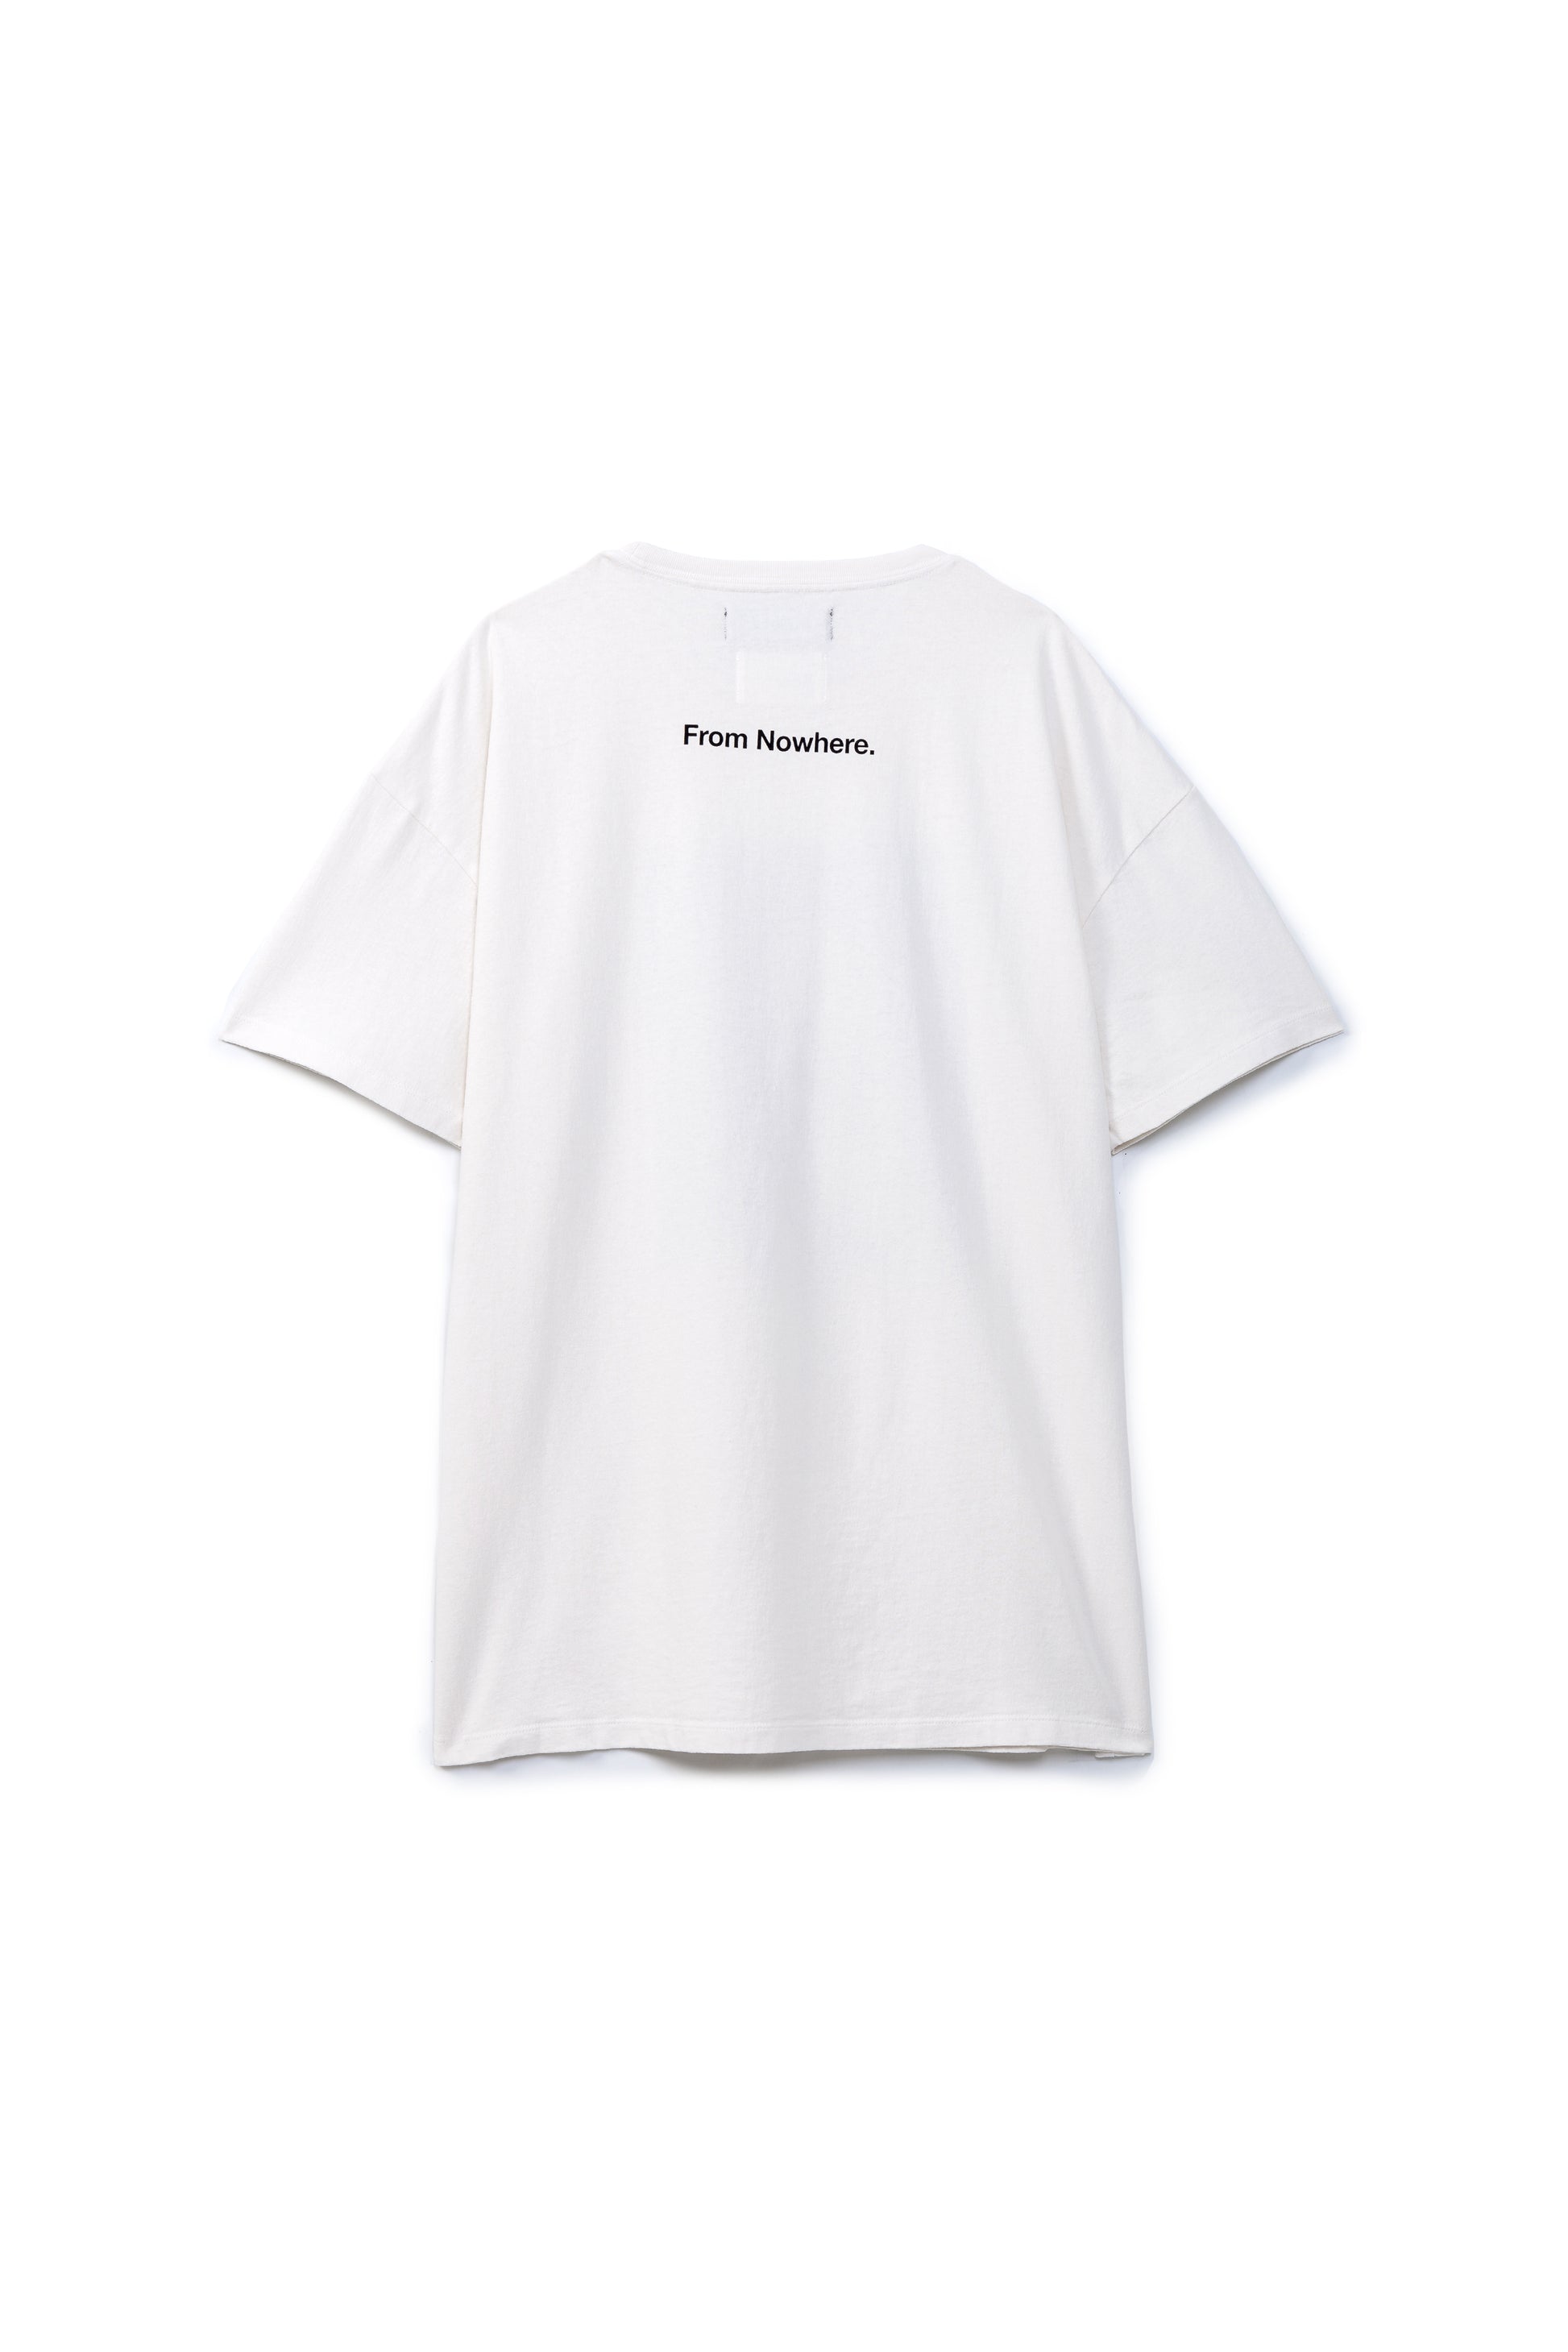 PURPLE BRAND - Men's Relaxed Fit T-Shirt - Style No. P101 - White From Nowhere - Back